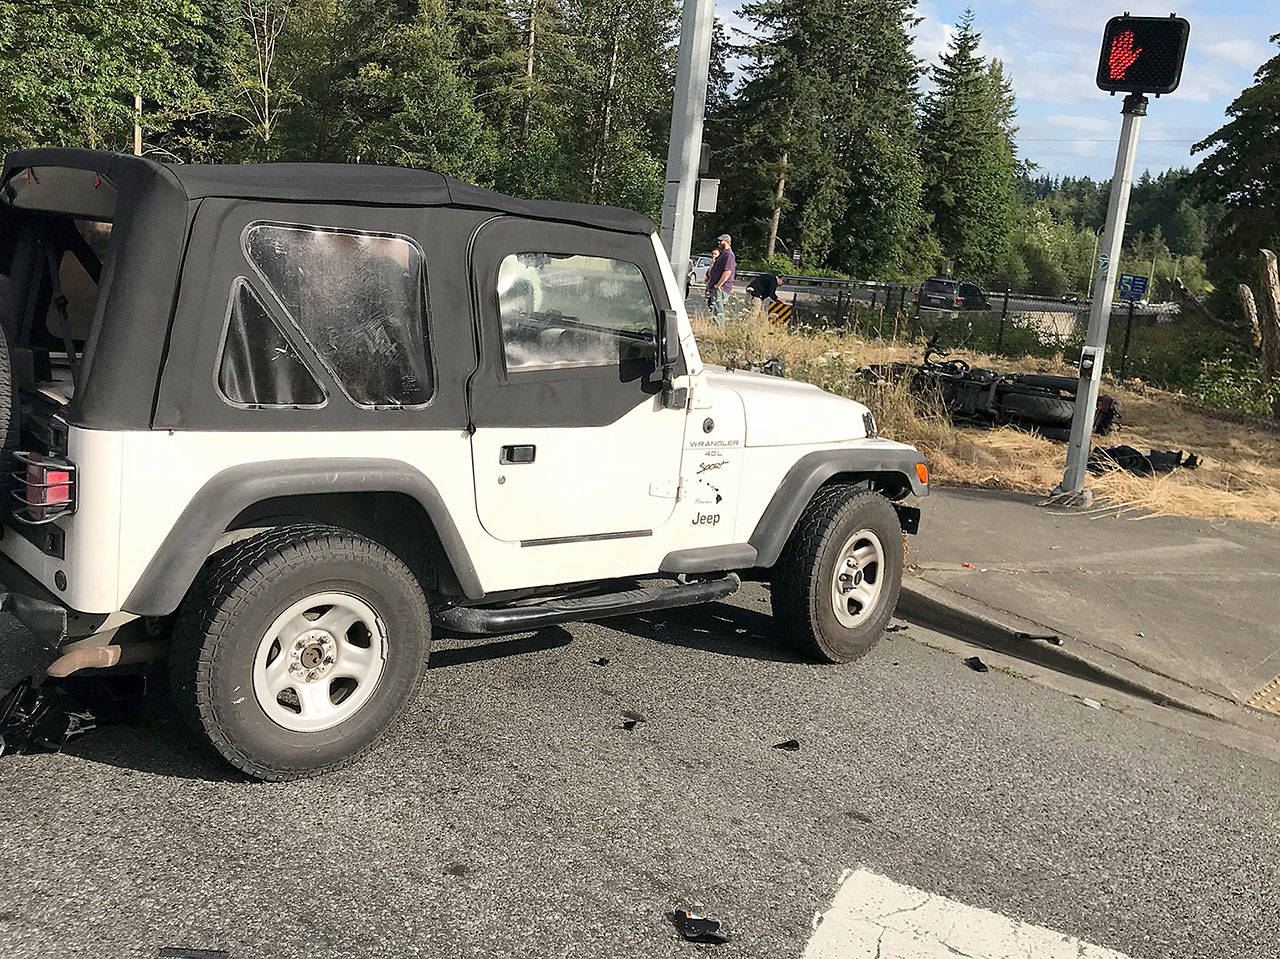 Two motorcycle riders had critical injuries after a Saturday night crash with an SUV near the intersection of Highway 9 and 20th Street SE in Lake Stevens. (Lake Stevens Fire)